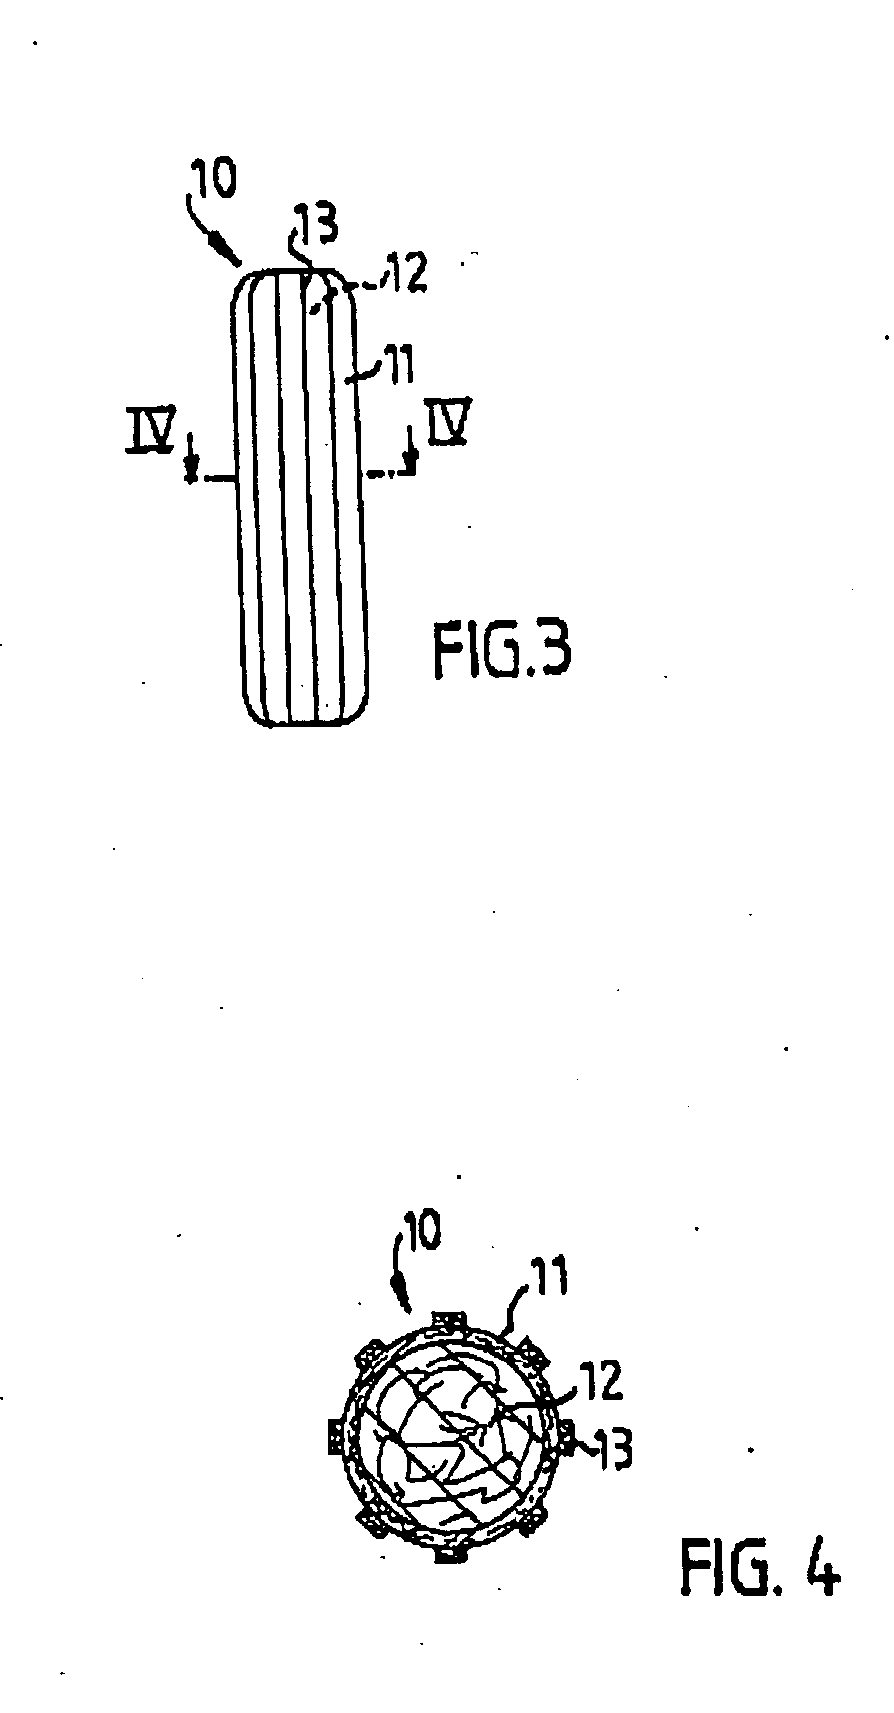 Hygiene product with a probiotic composition